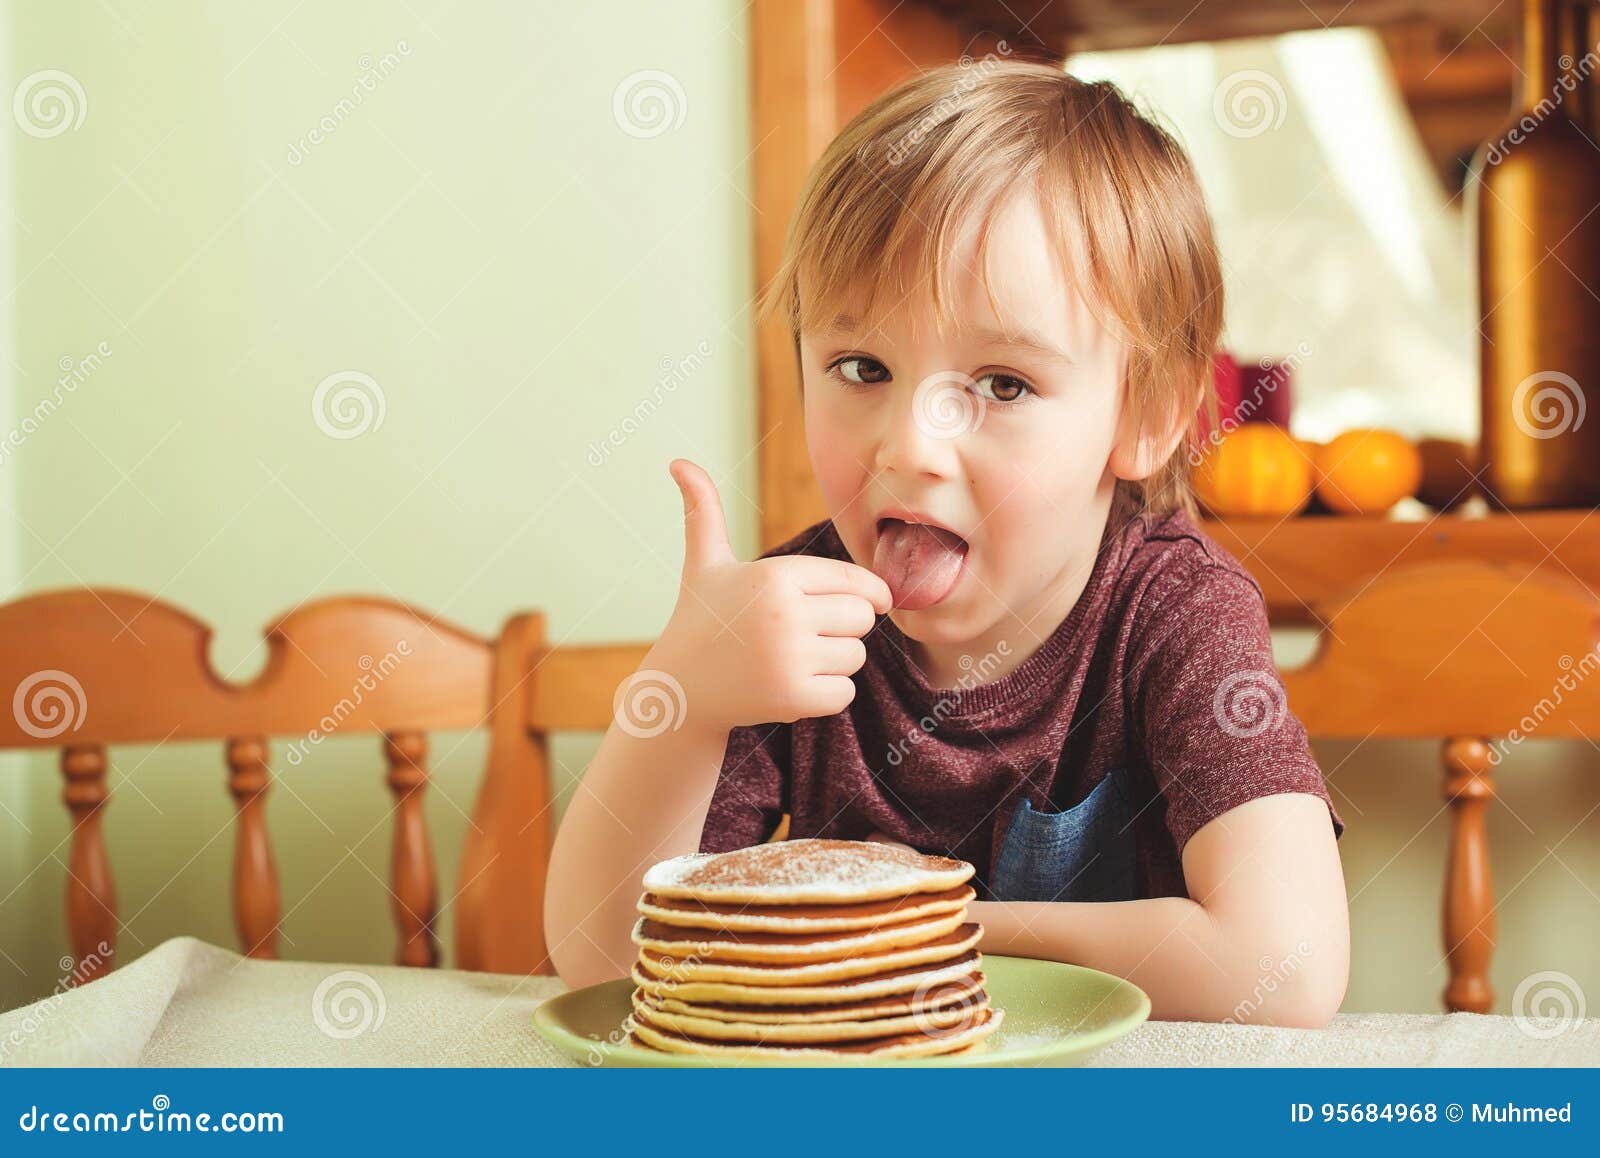 Cute Little Boy Eating A Stack Of Pancakes In The Kitchen Stock Photo